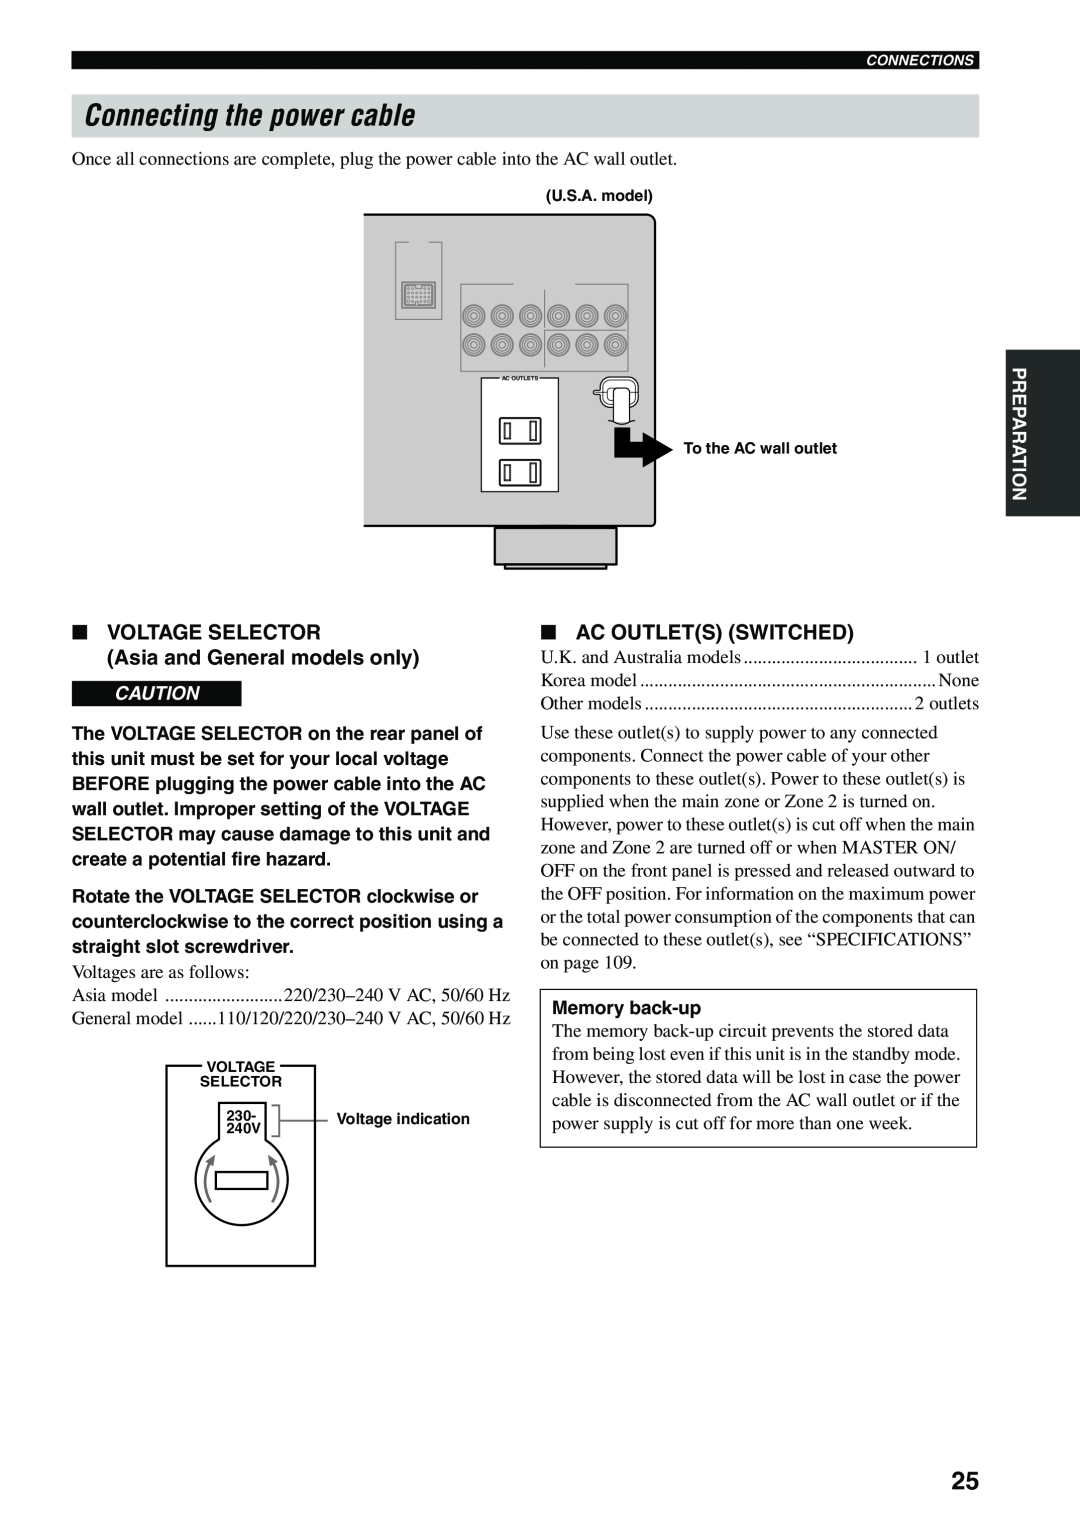 Yamaha RX-V559 owner manual Connecting the power cable, Ac Outlets Switched, VOLTAGE SELECTOR Asia and General models only 